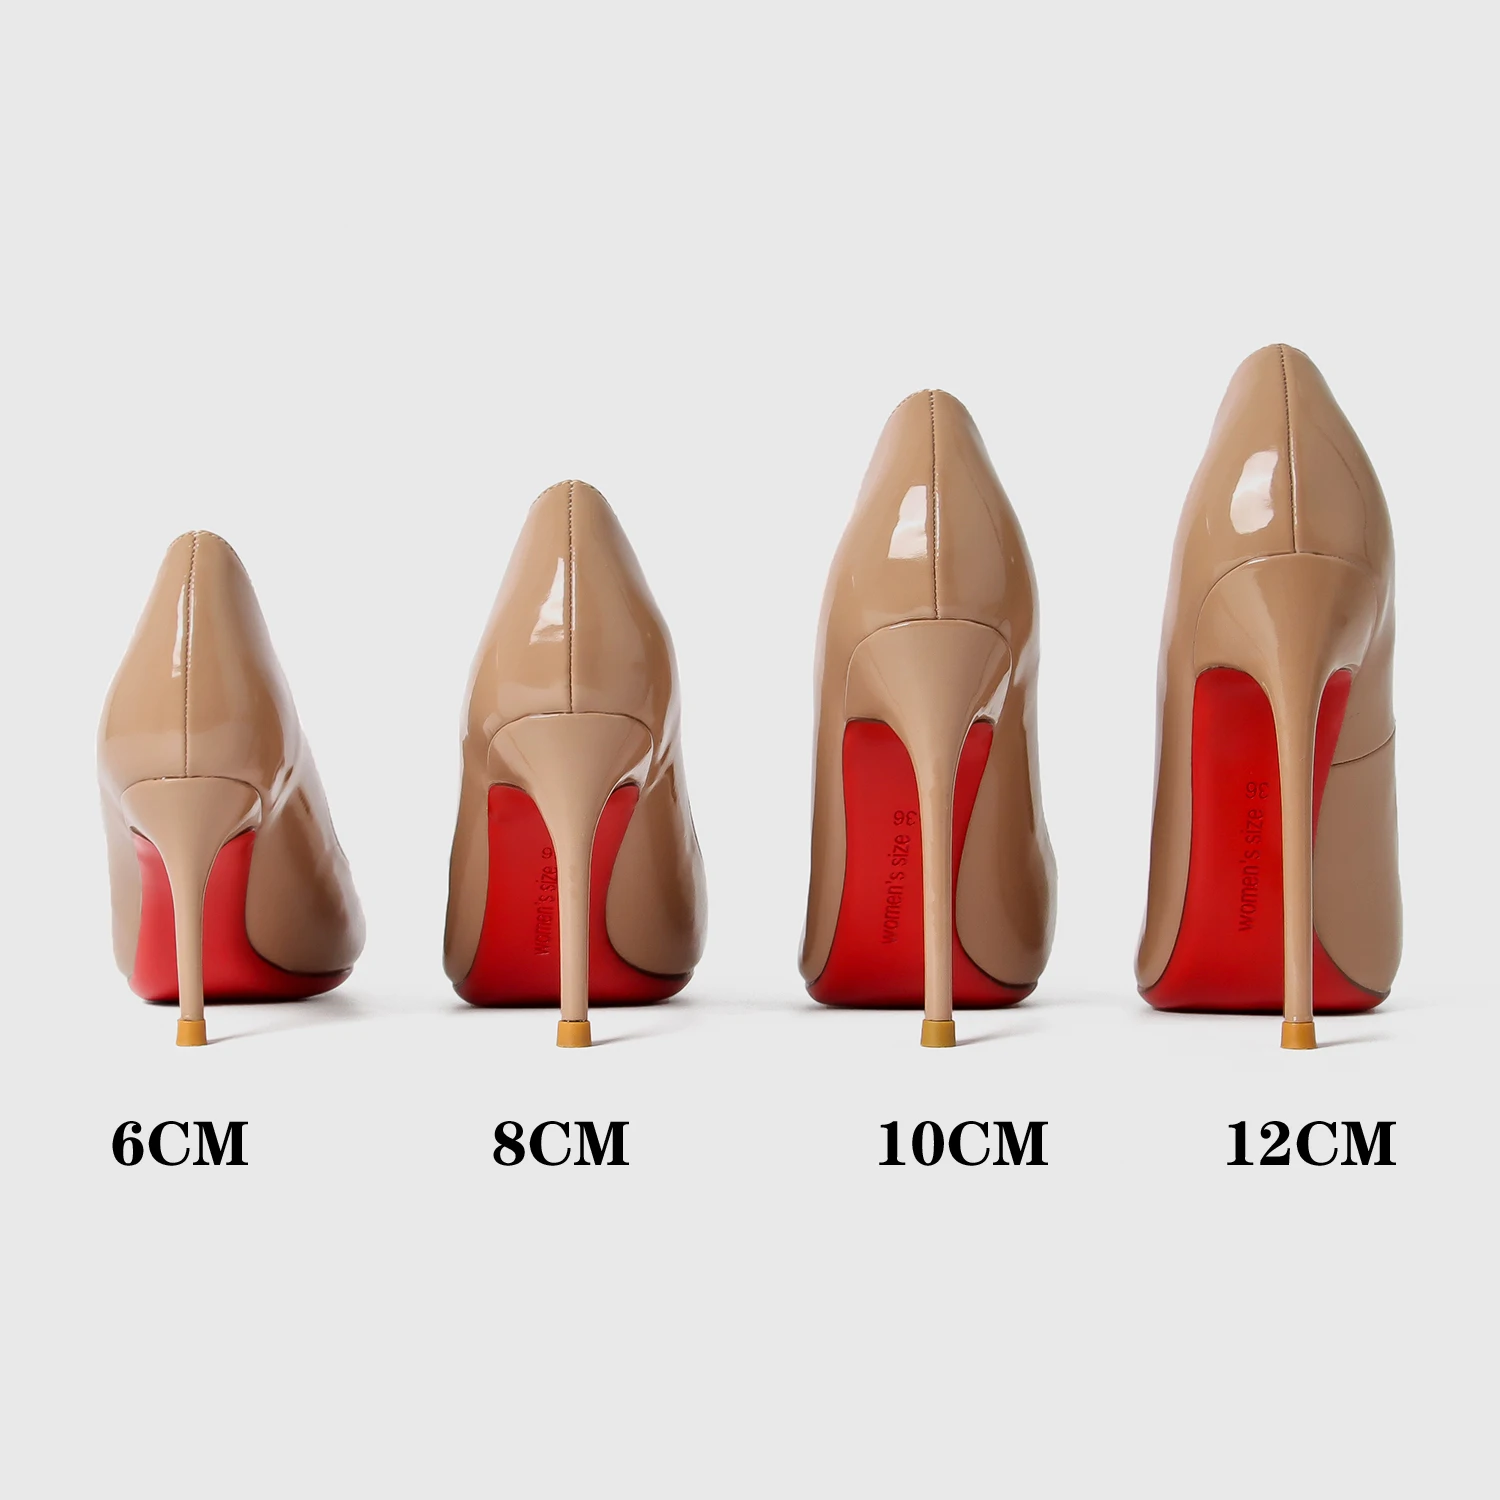 Christian Louboutin: The Rise of the Red Sole — Spoiled Splendid